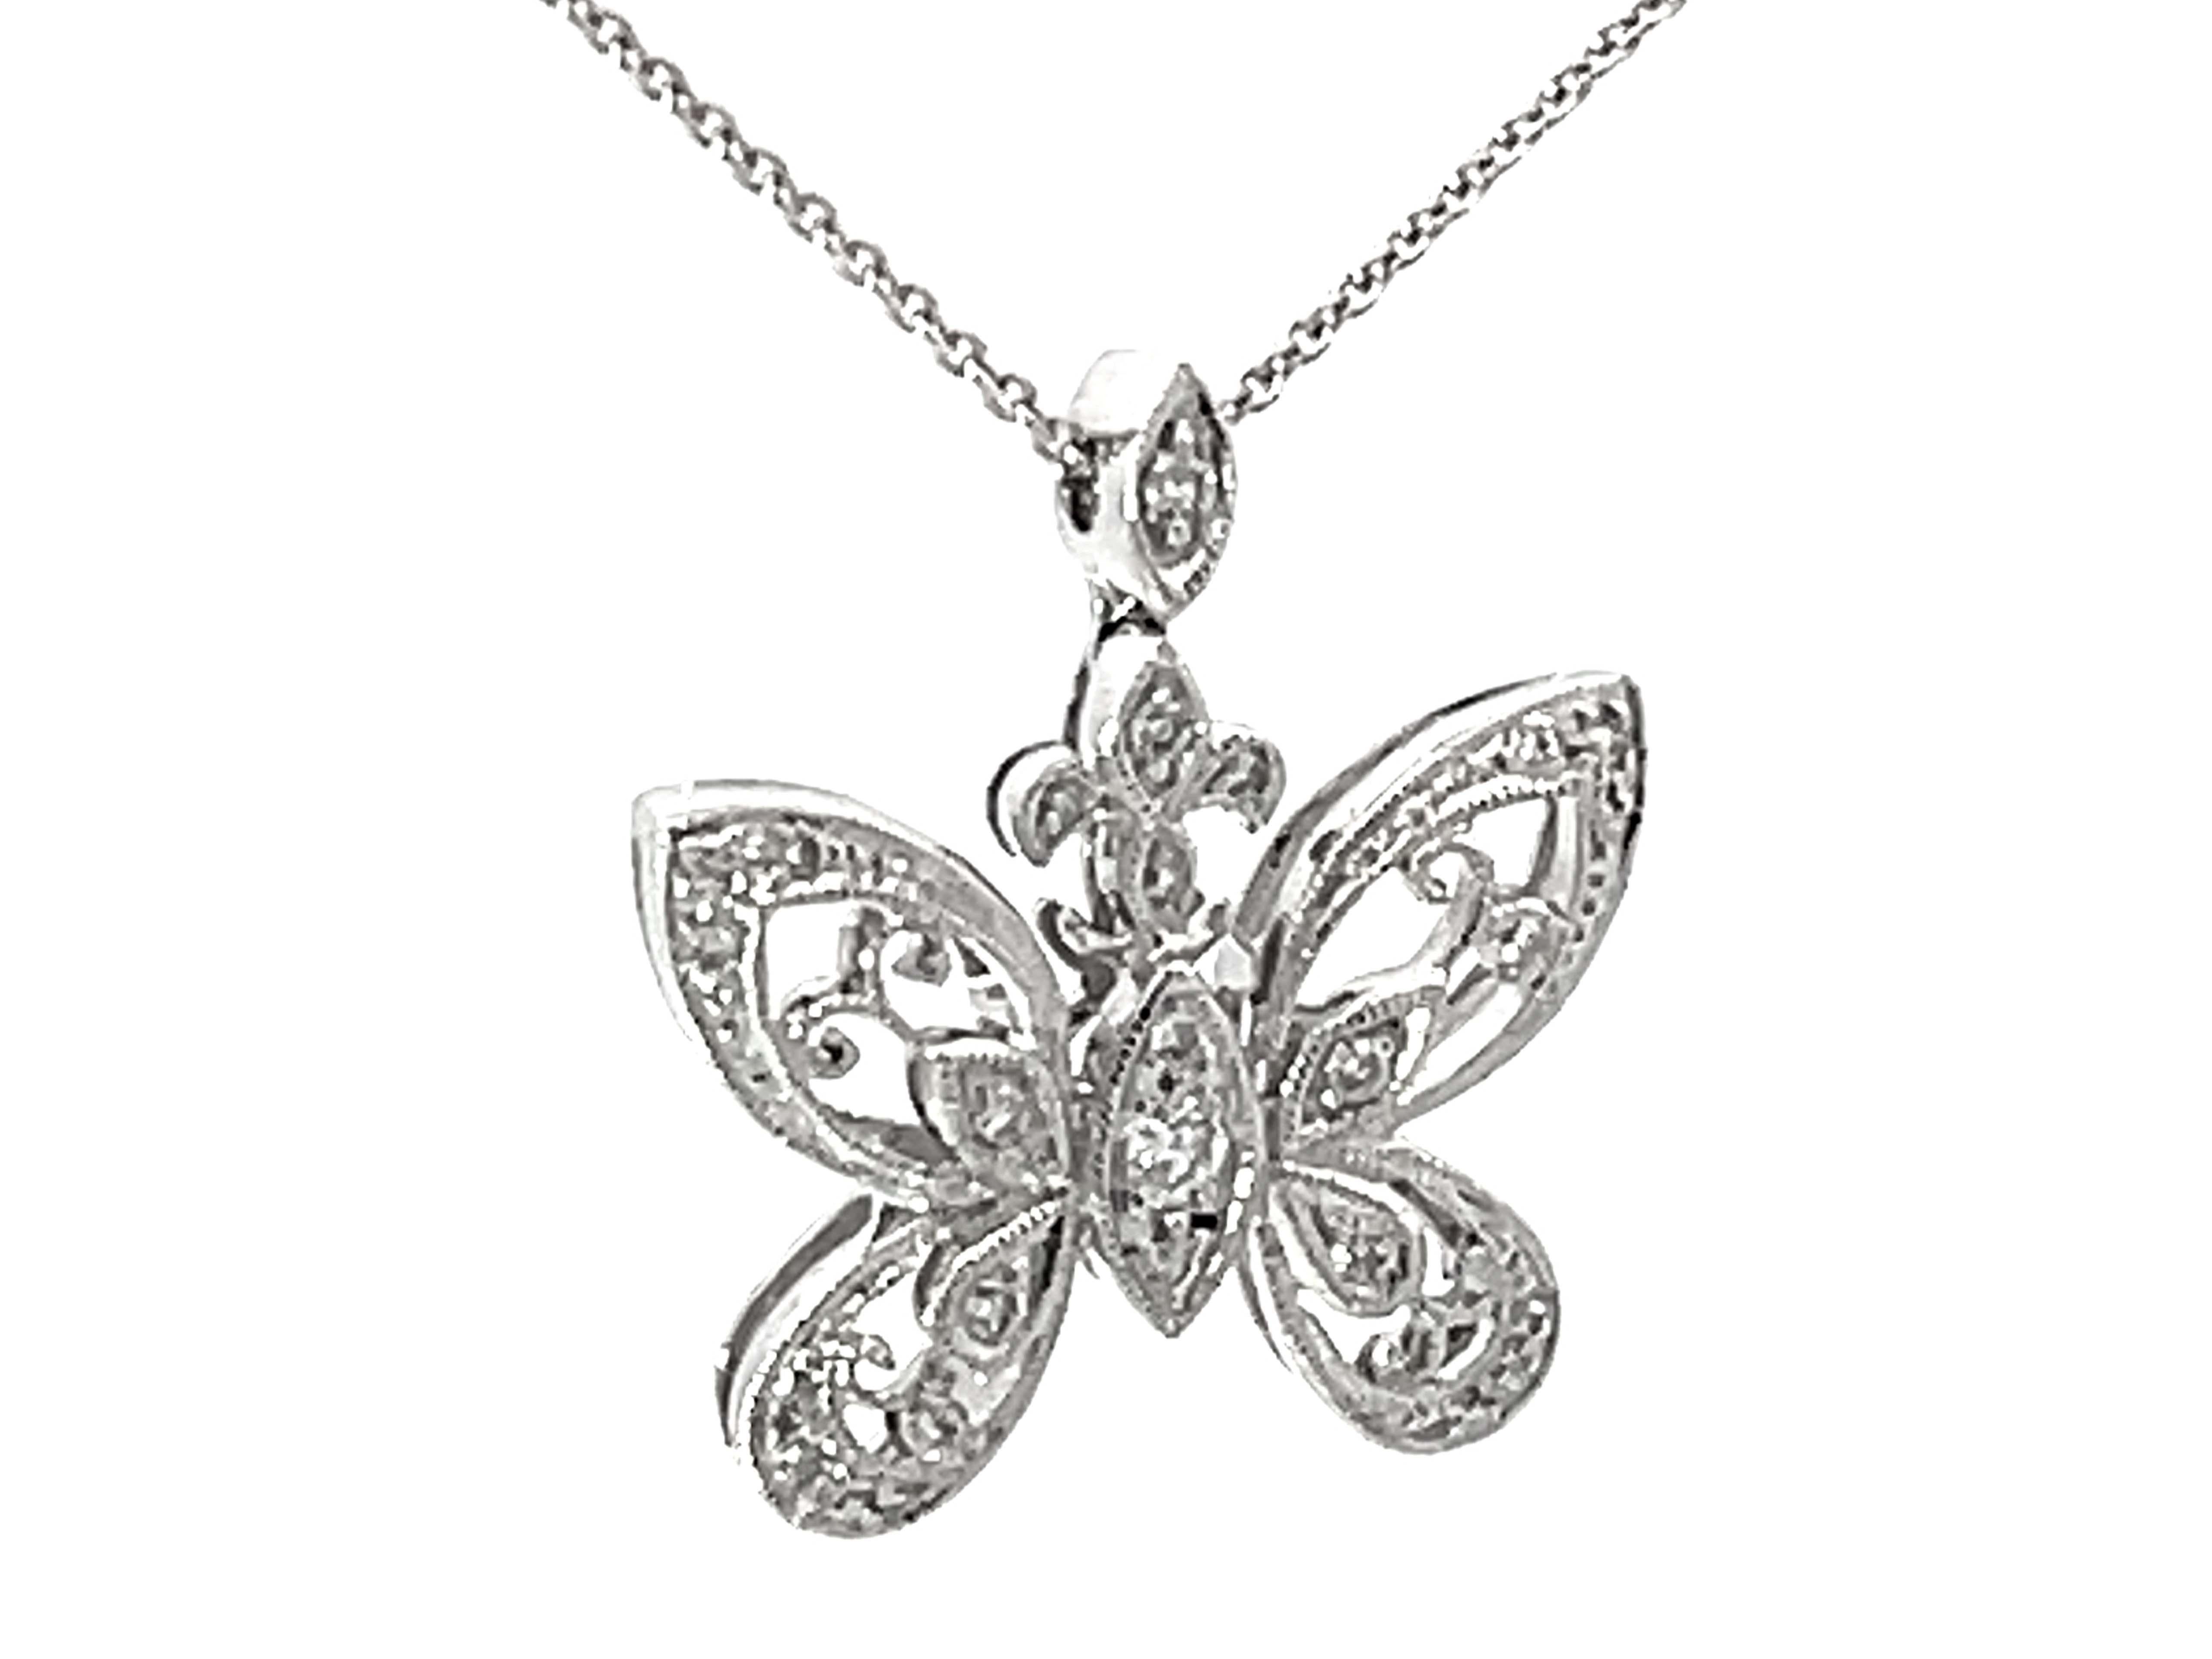 Modern Beverley K Diamond Butterfly Pendant Necklace Solid White Gold For Sale